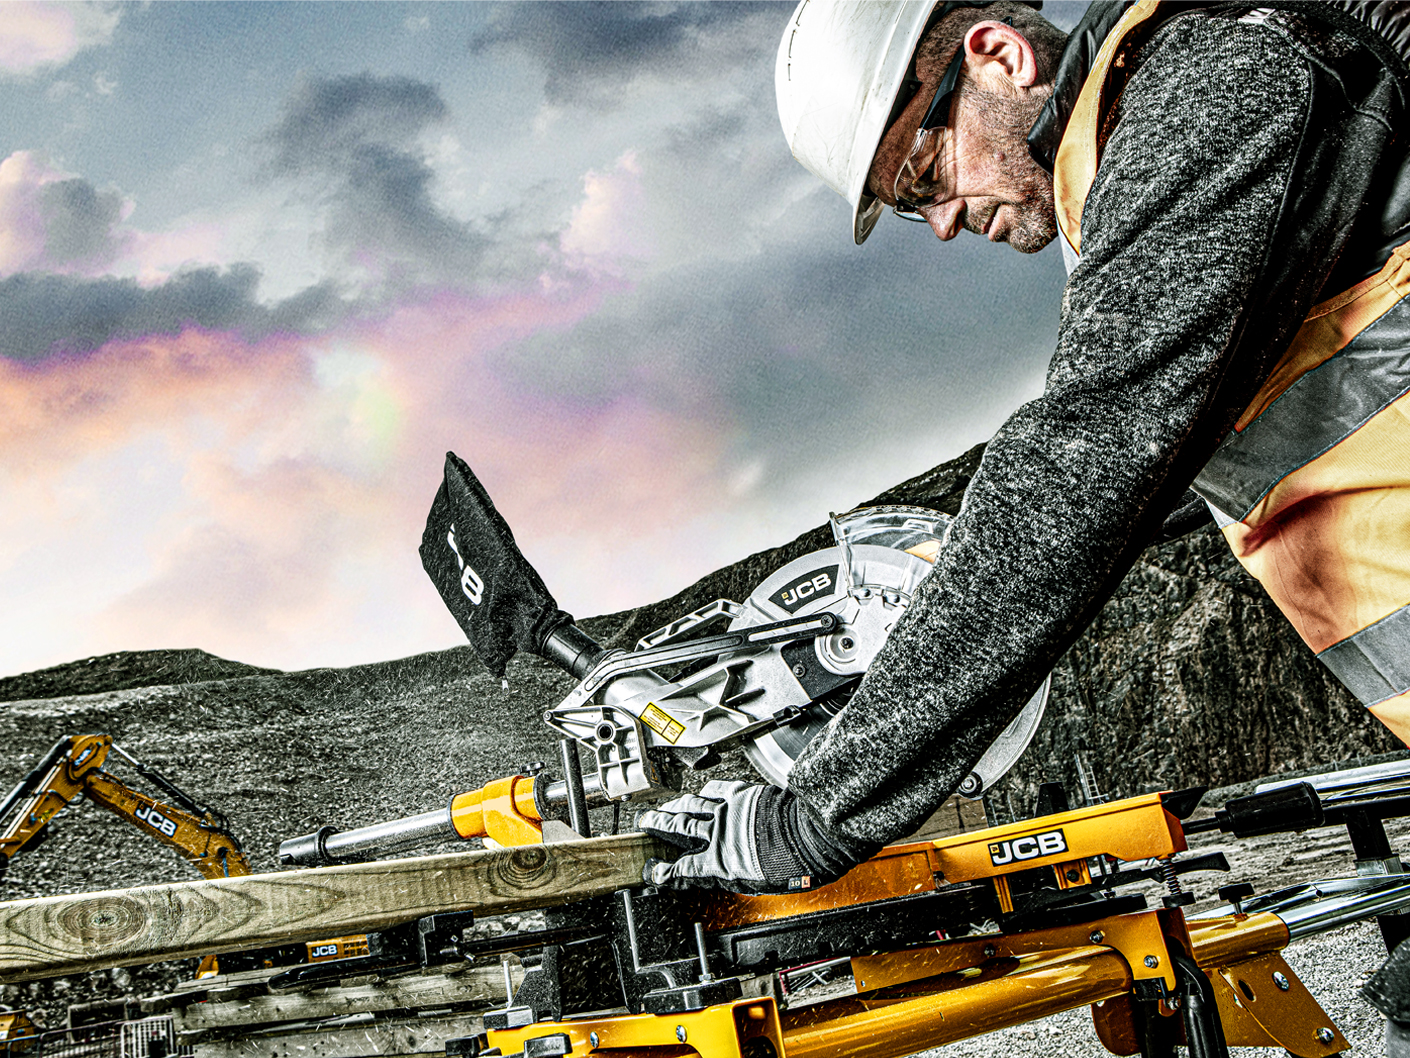 location-product-and-lifestyle-images-for-jcb-tools-in-manchester